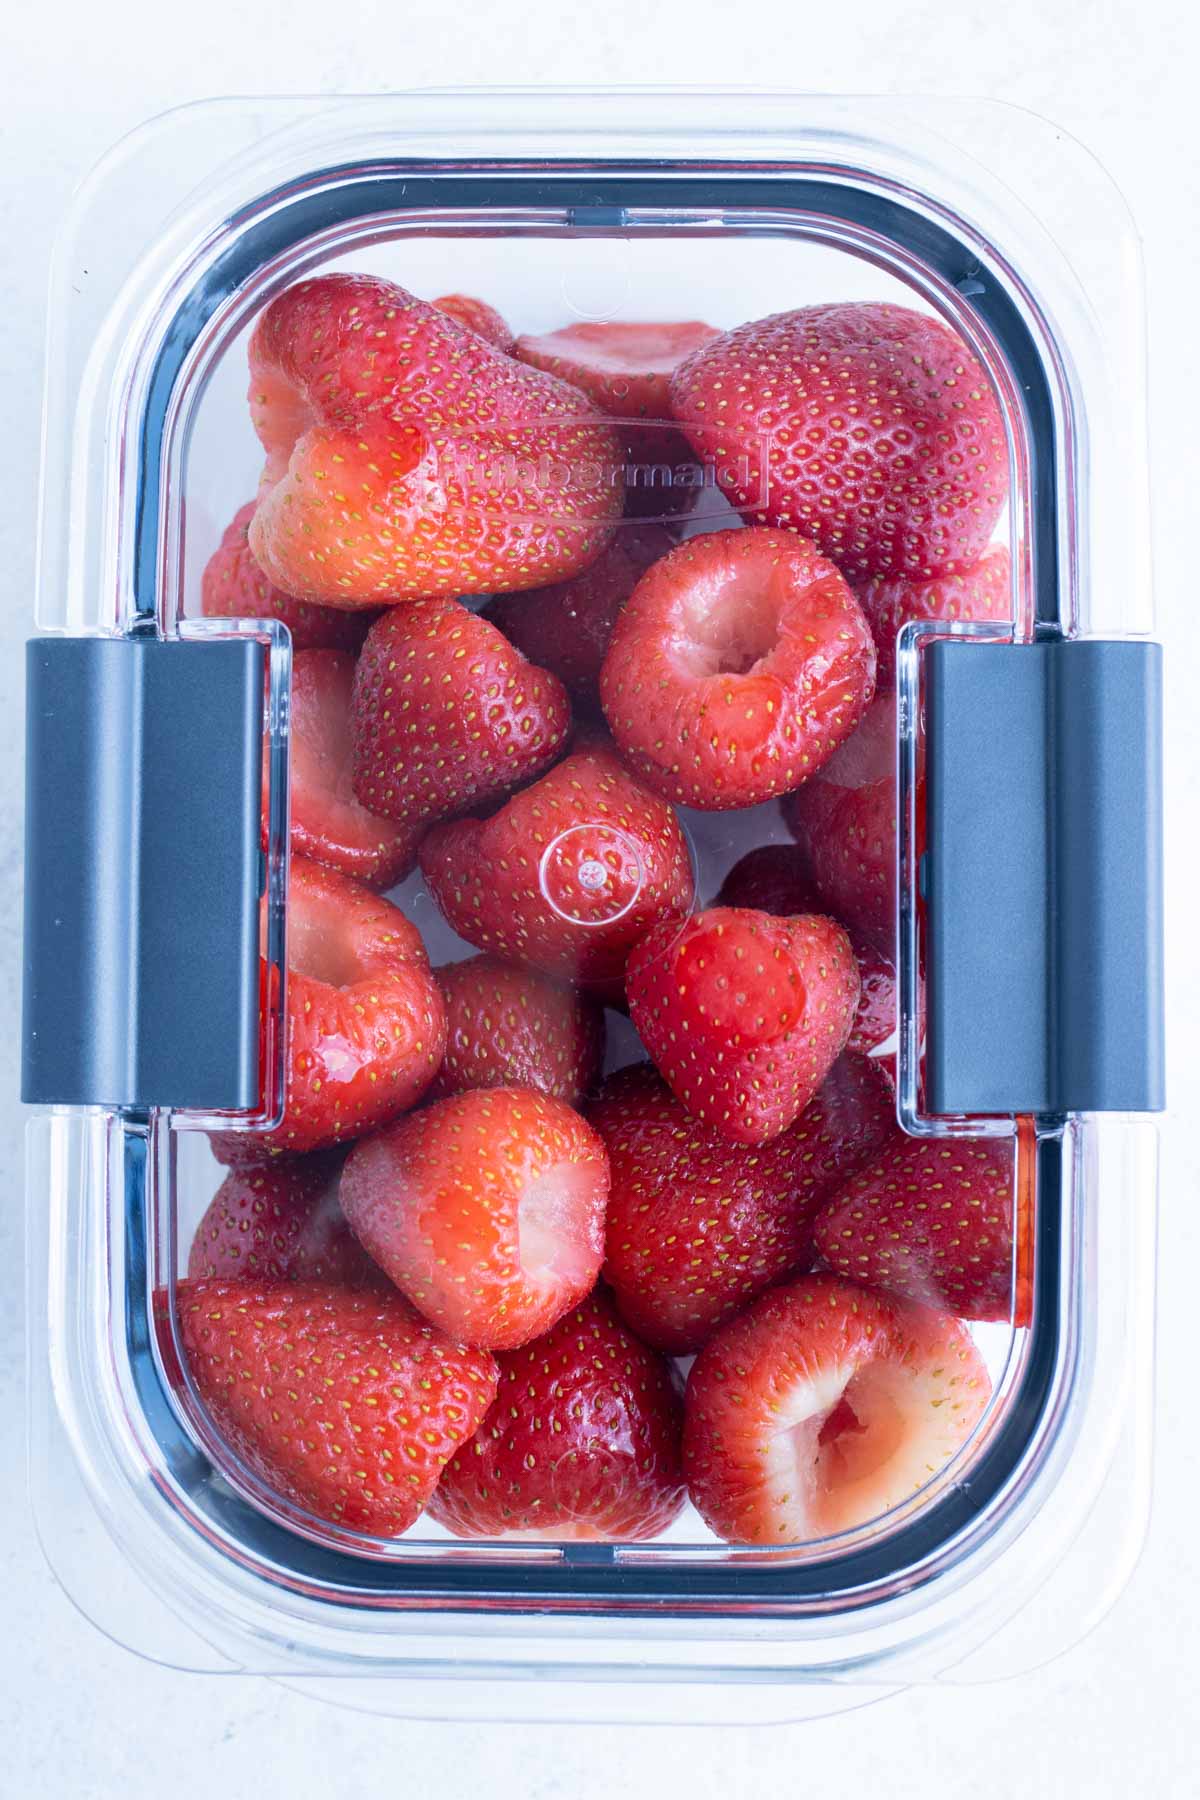 The lid is placed on the airtight container of frozen strawberries.